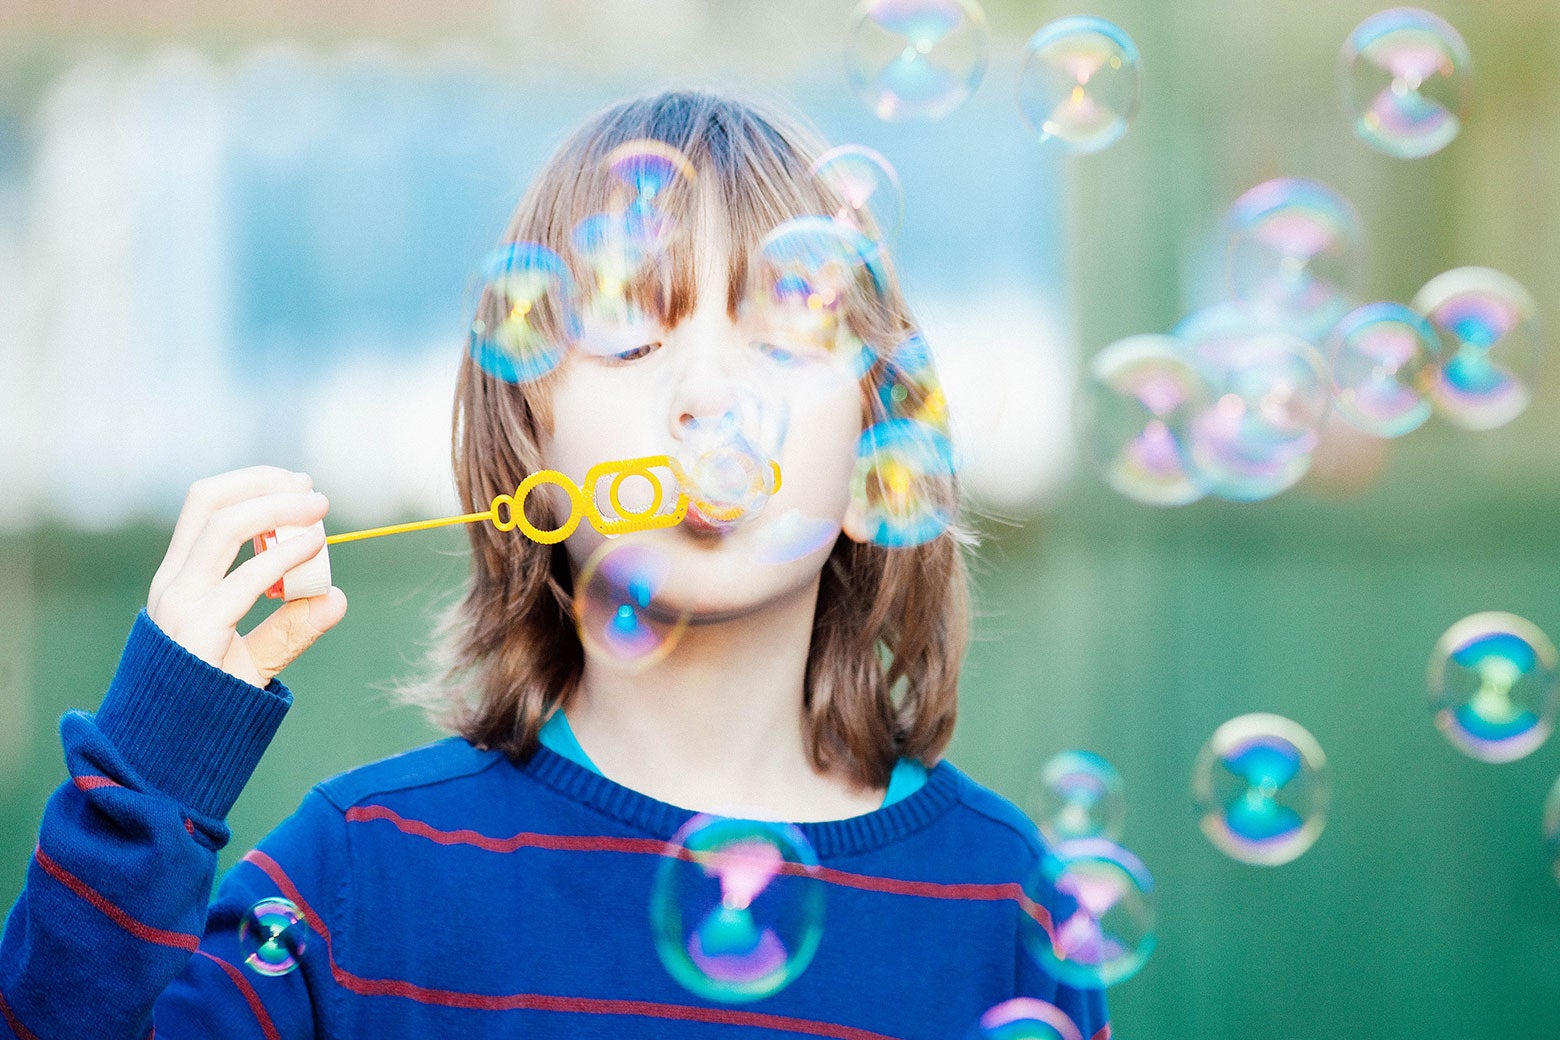 A child with long hair blows bubbles.